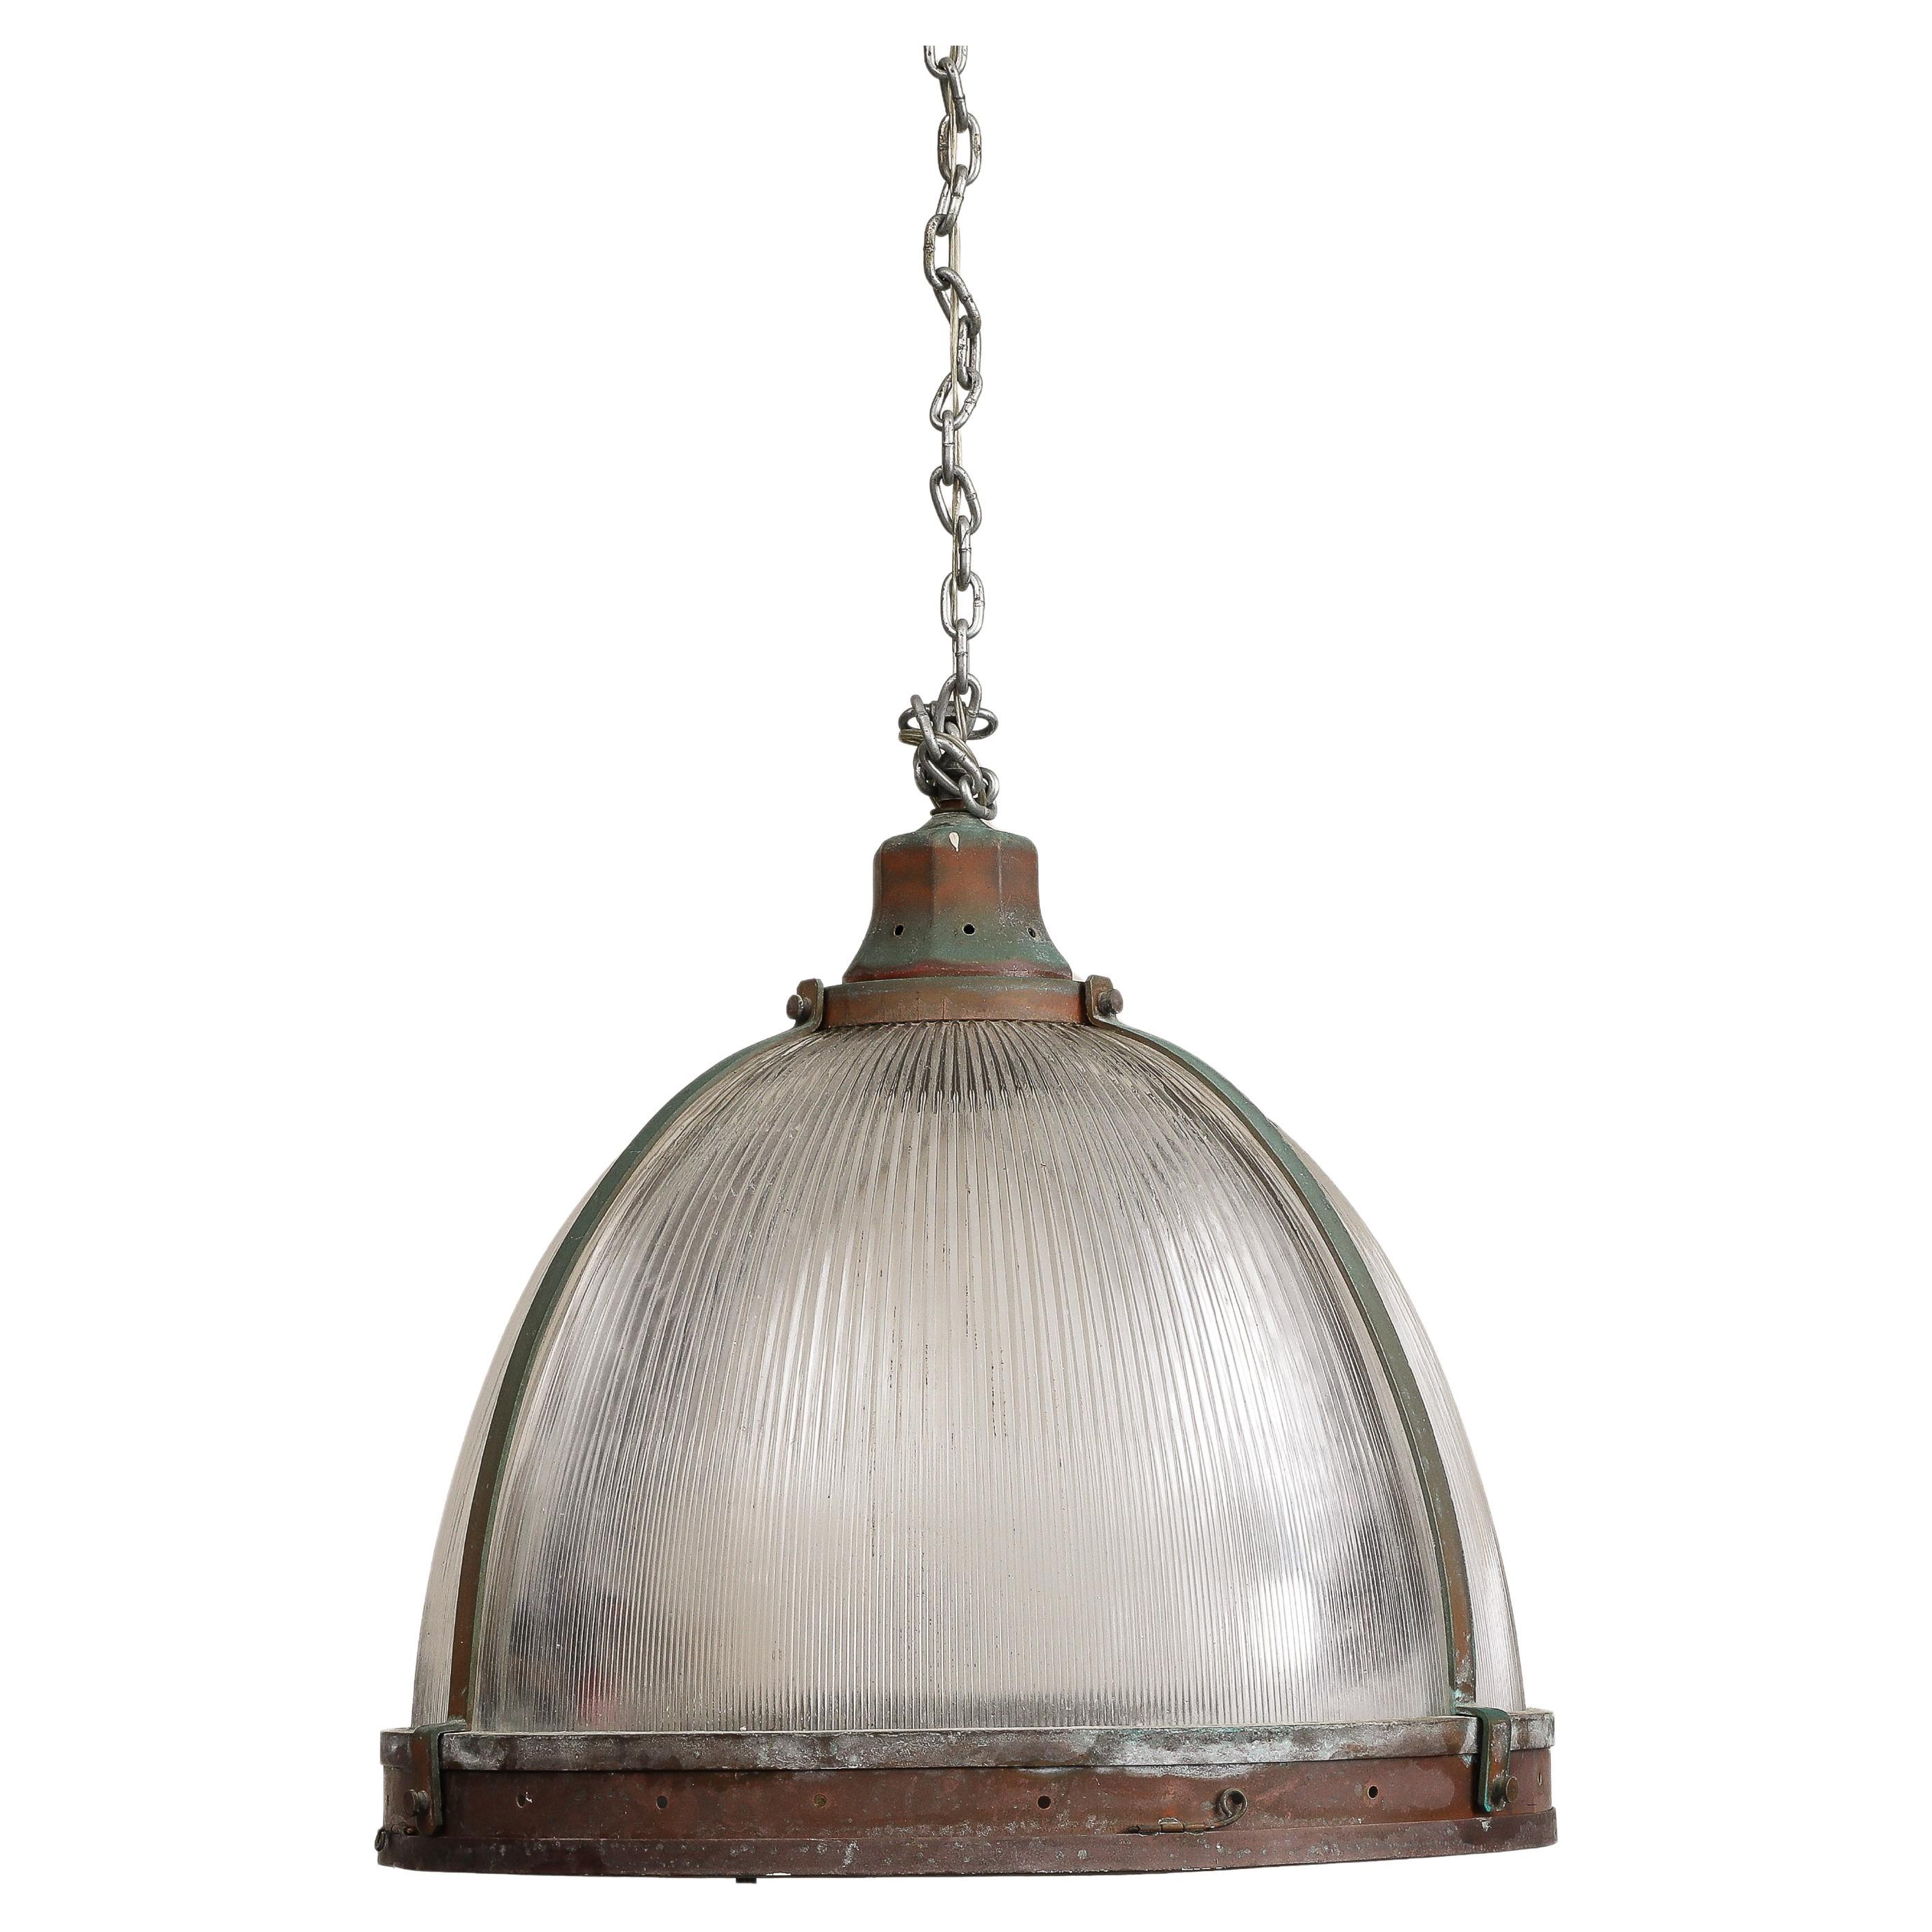 Vintage Industrial Copper and Reeded Glass Pendant Light